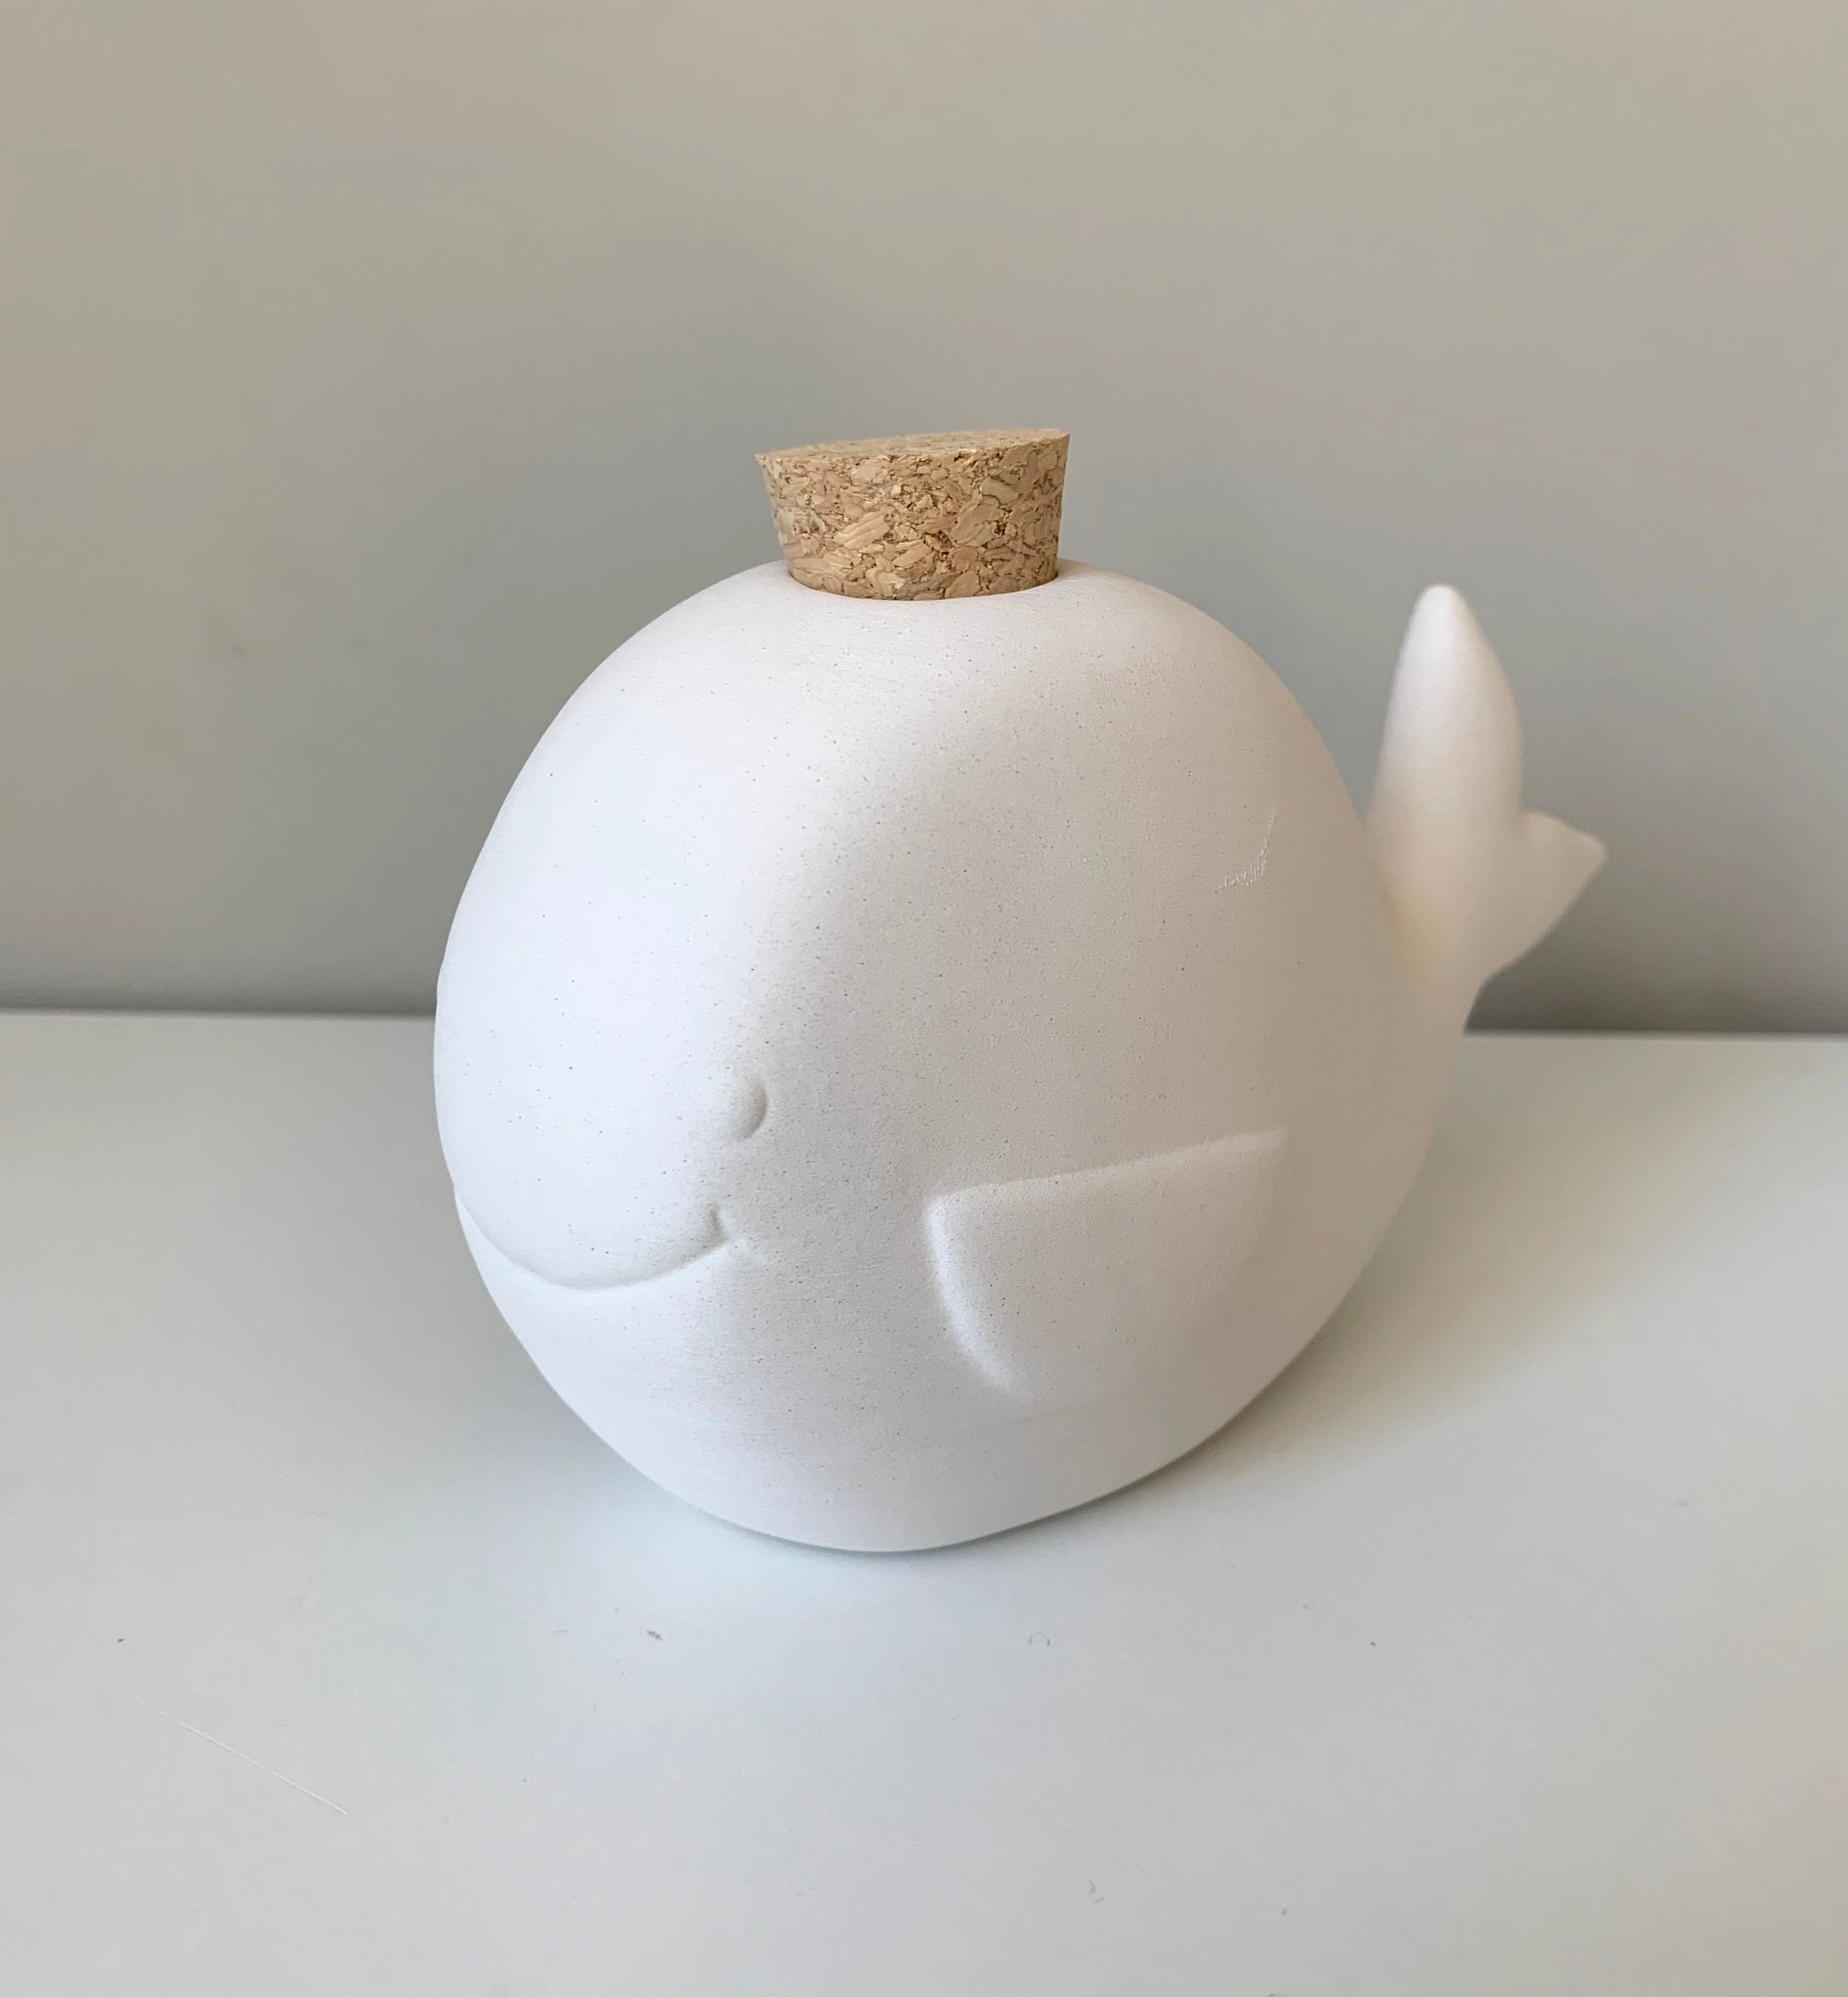 Whale Pottery Painting Kit, Whale Money Bank, at Home Pottery Painting,  Virtual Event Craft, Ceramic Art Kits for Kids, Kids Art Kits -  Denmark